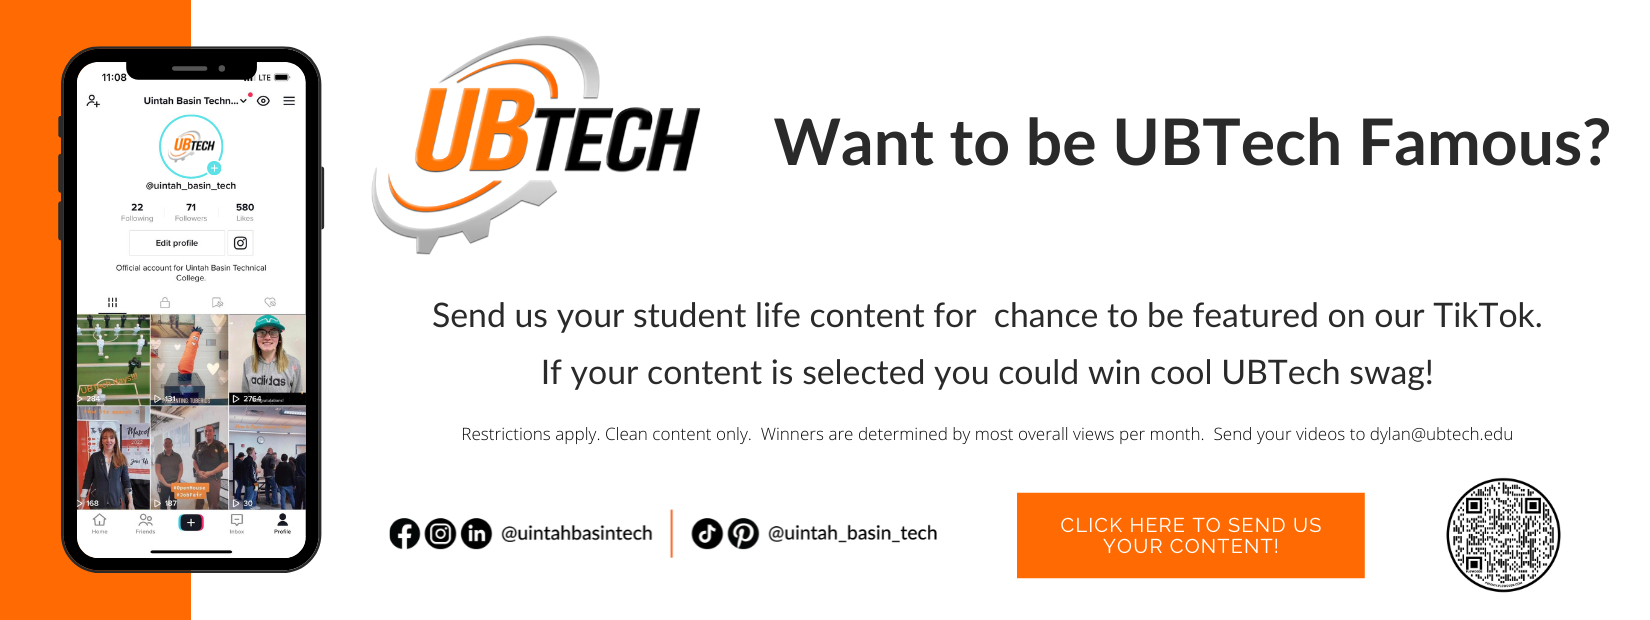 Send us your student life content for a chance to be featured on #UBTech's official TikTok account. If your content is selected, you could win cool UBTech swag! Make yourself UBTechFamous